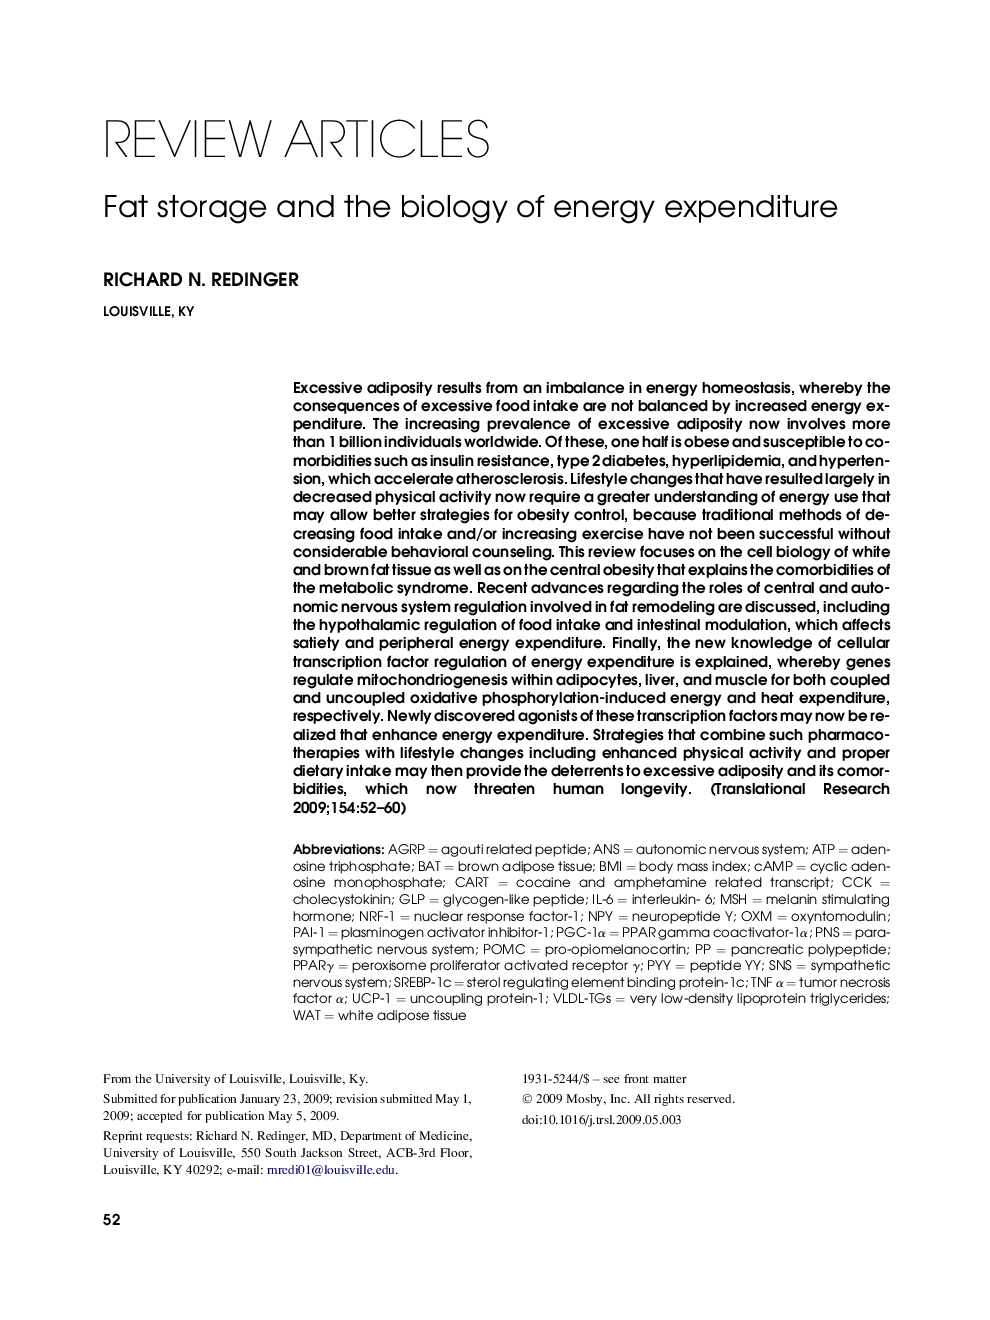 Fat storage and the biology of energy expenditure